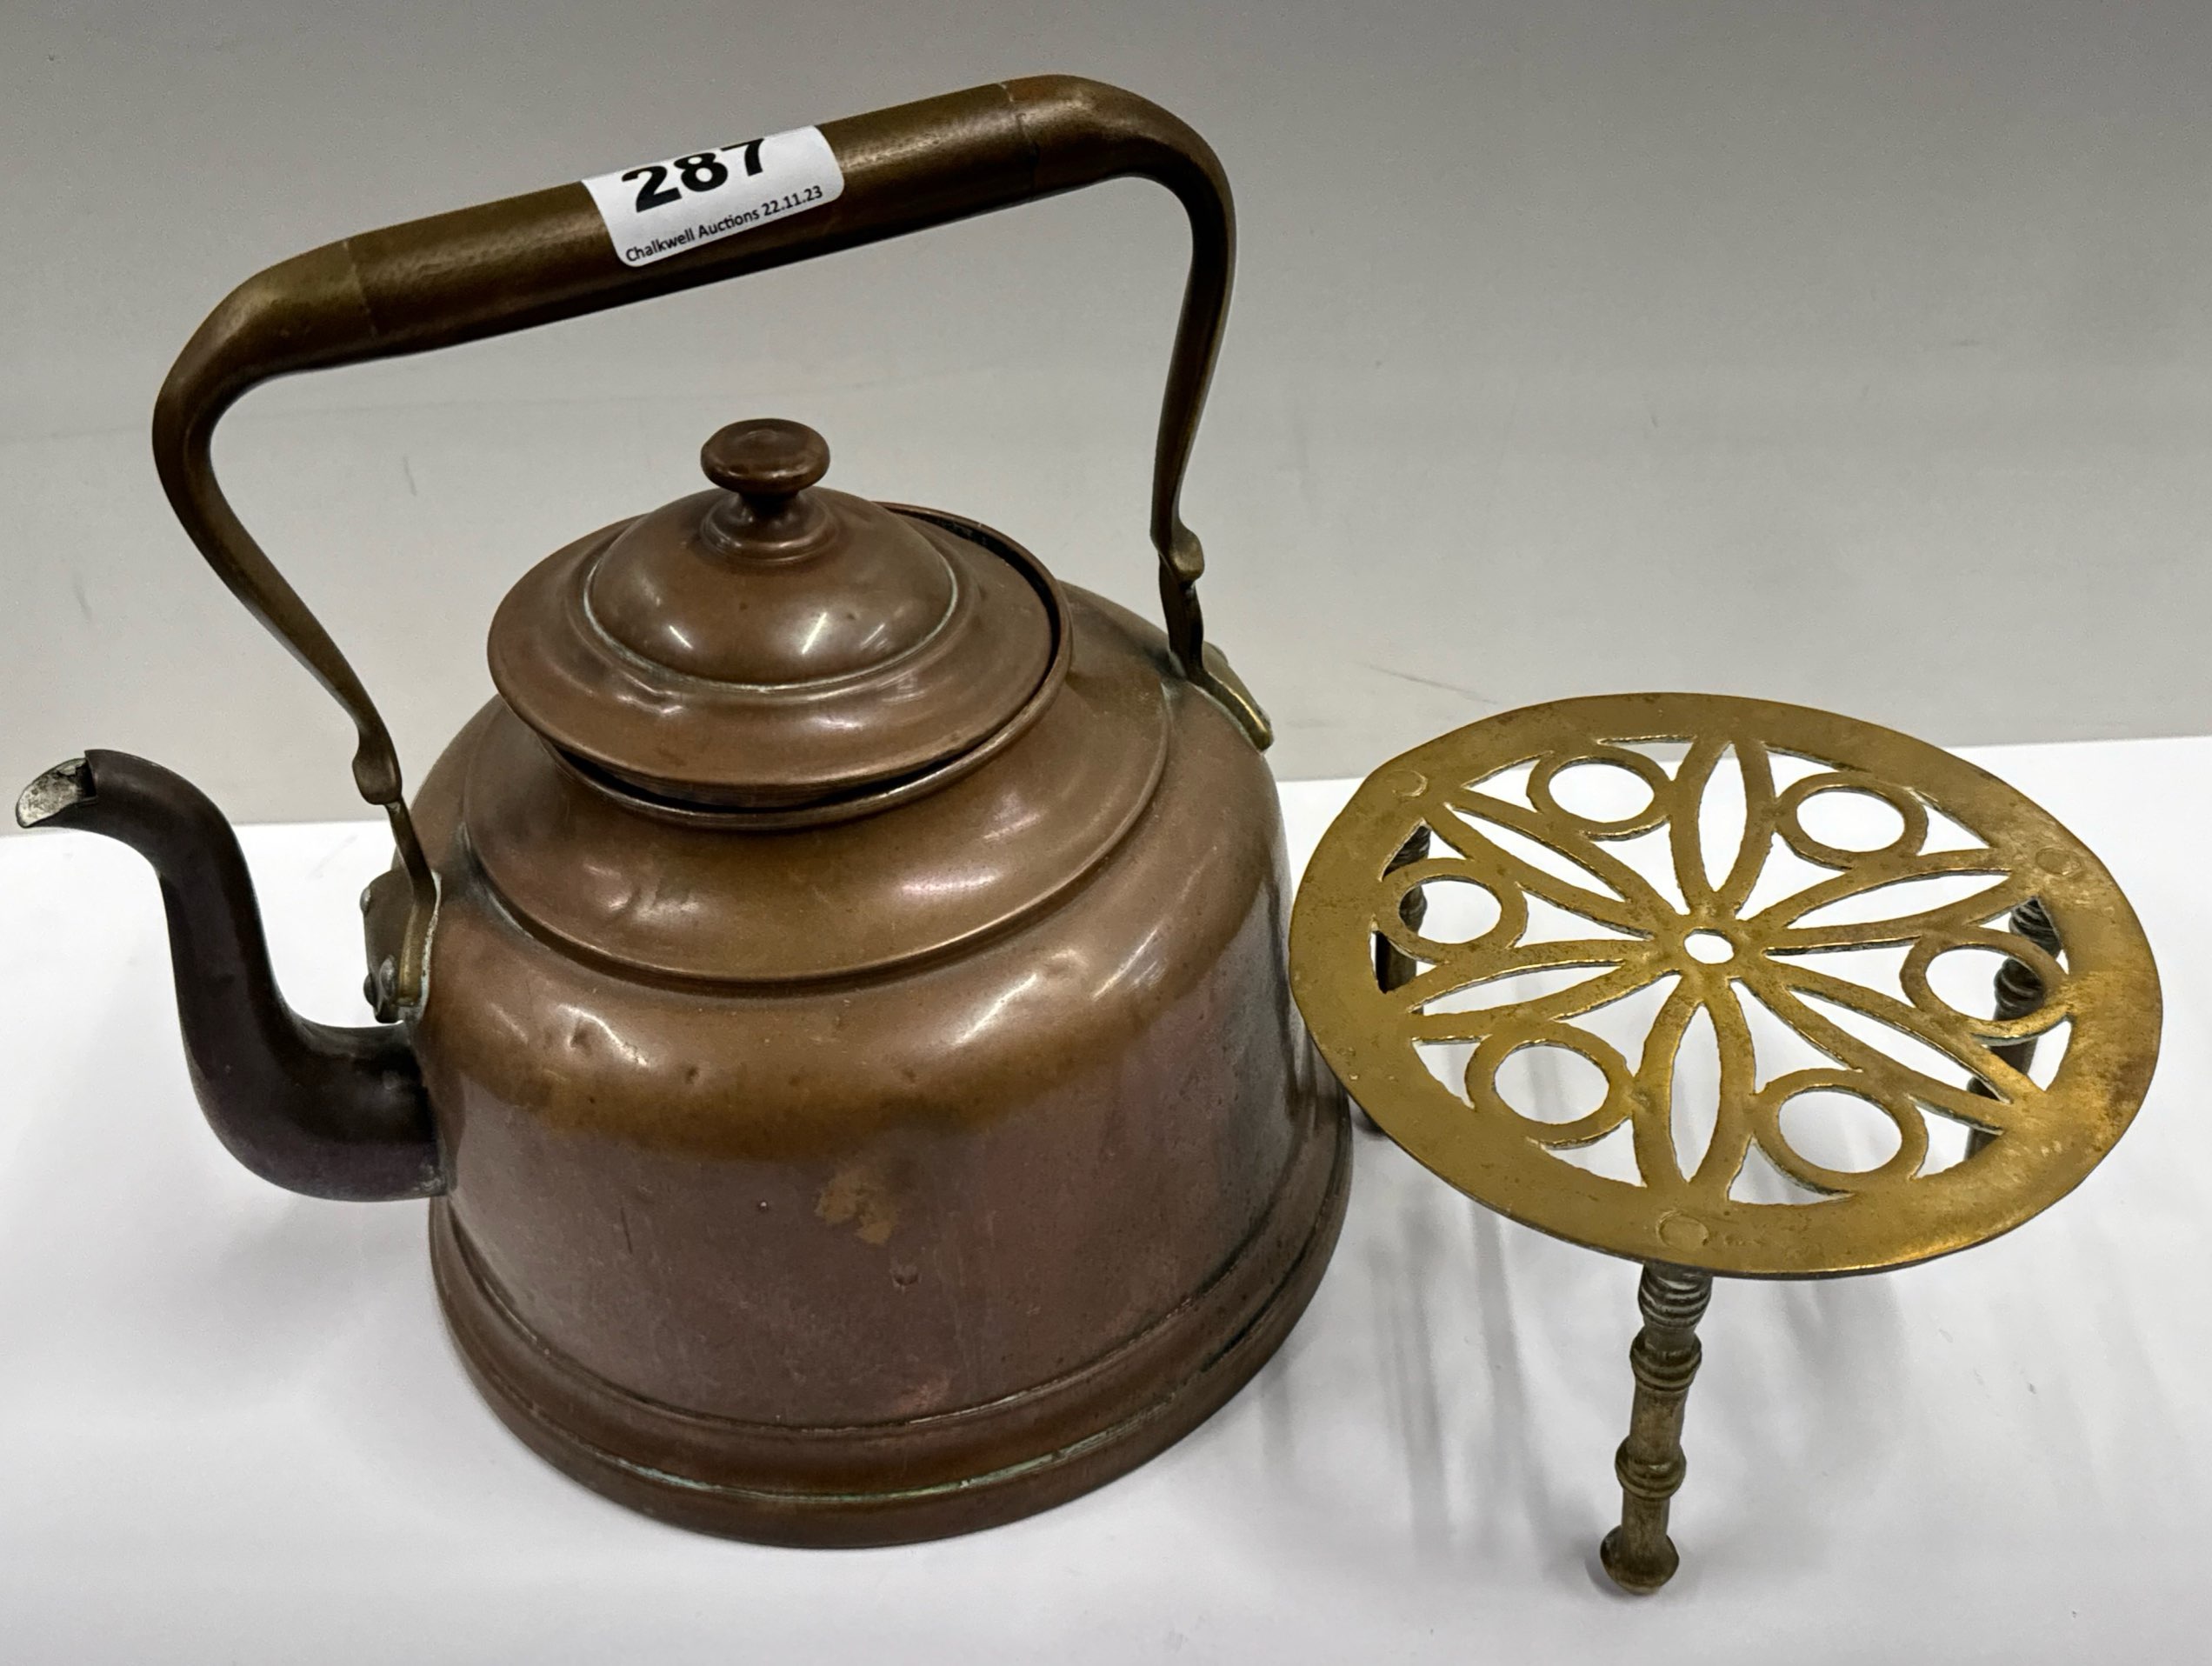 A copper kettle and brass trivet.